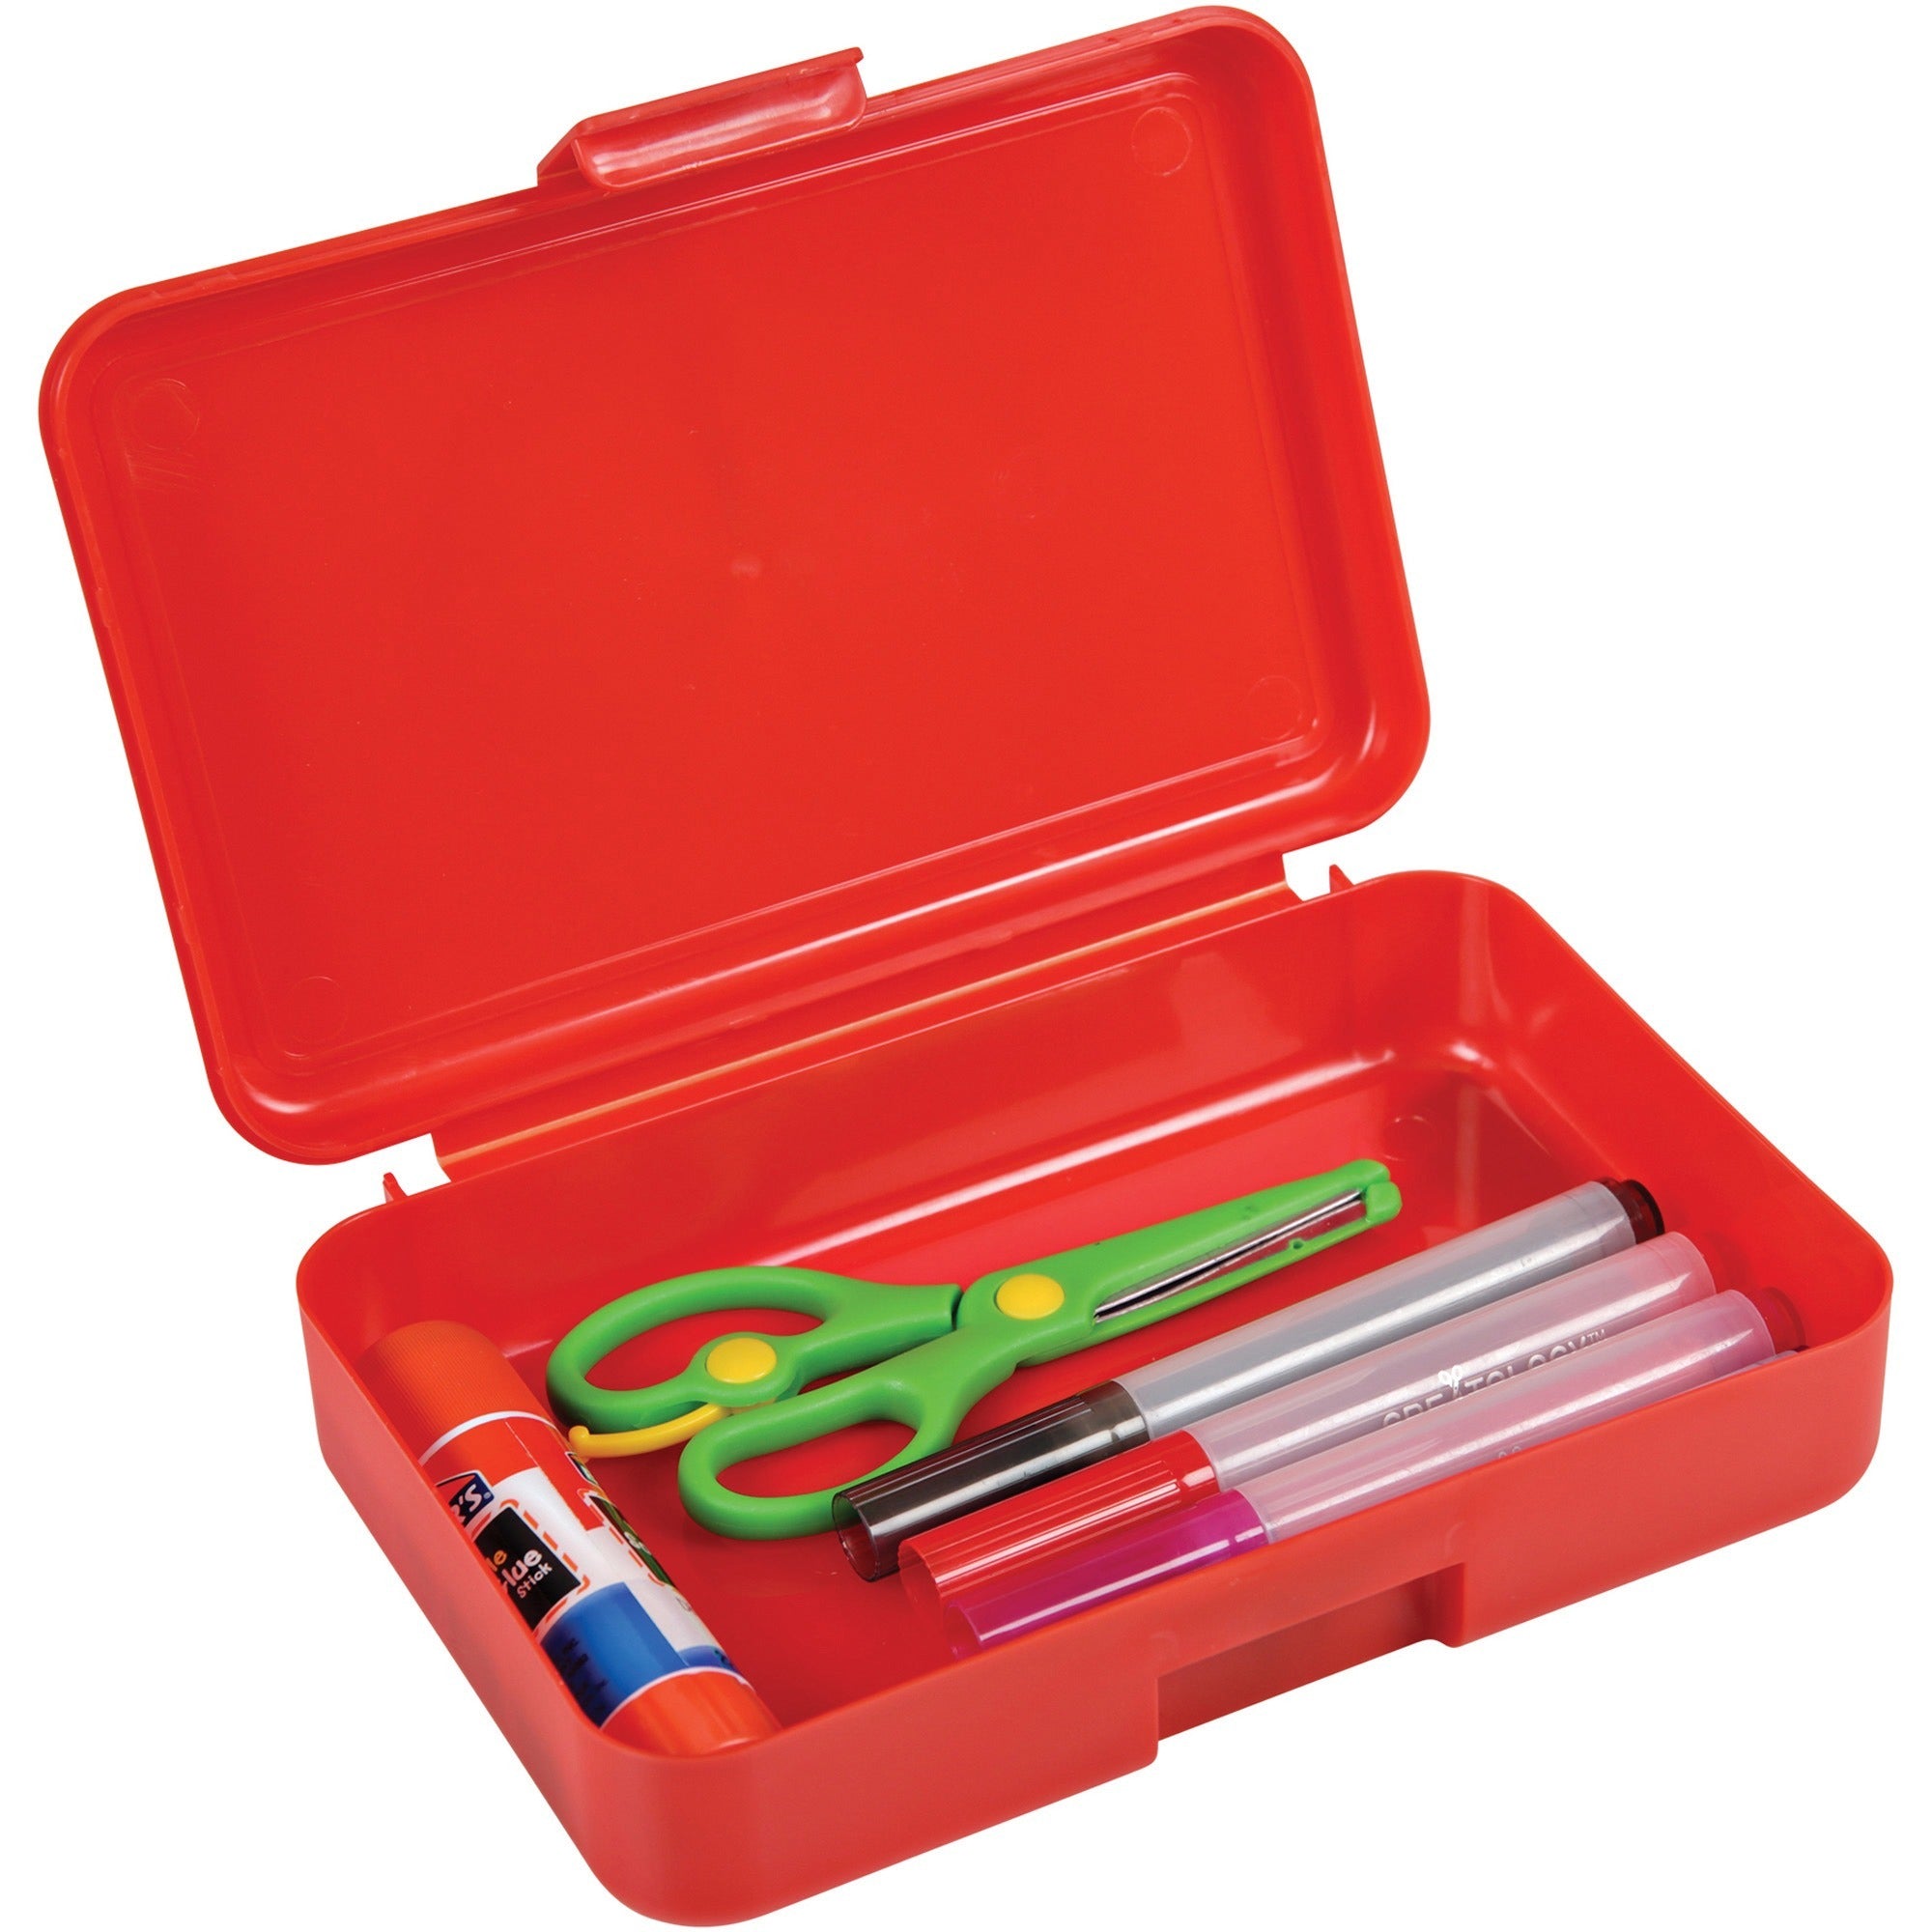 deflecto-antimicrobial-pencil-box-red-external-dimensions-54-width-x-8-depth-x-2-height-snap-closure-plastic-red-for-pencil-marker-supplies_def39504red - 1